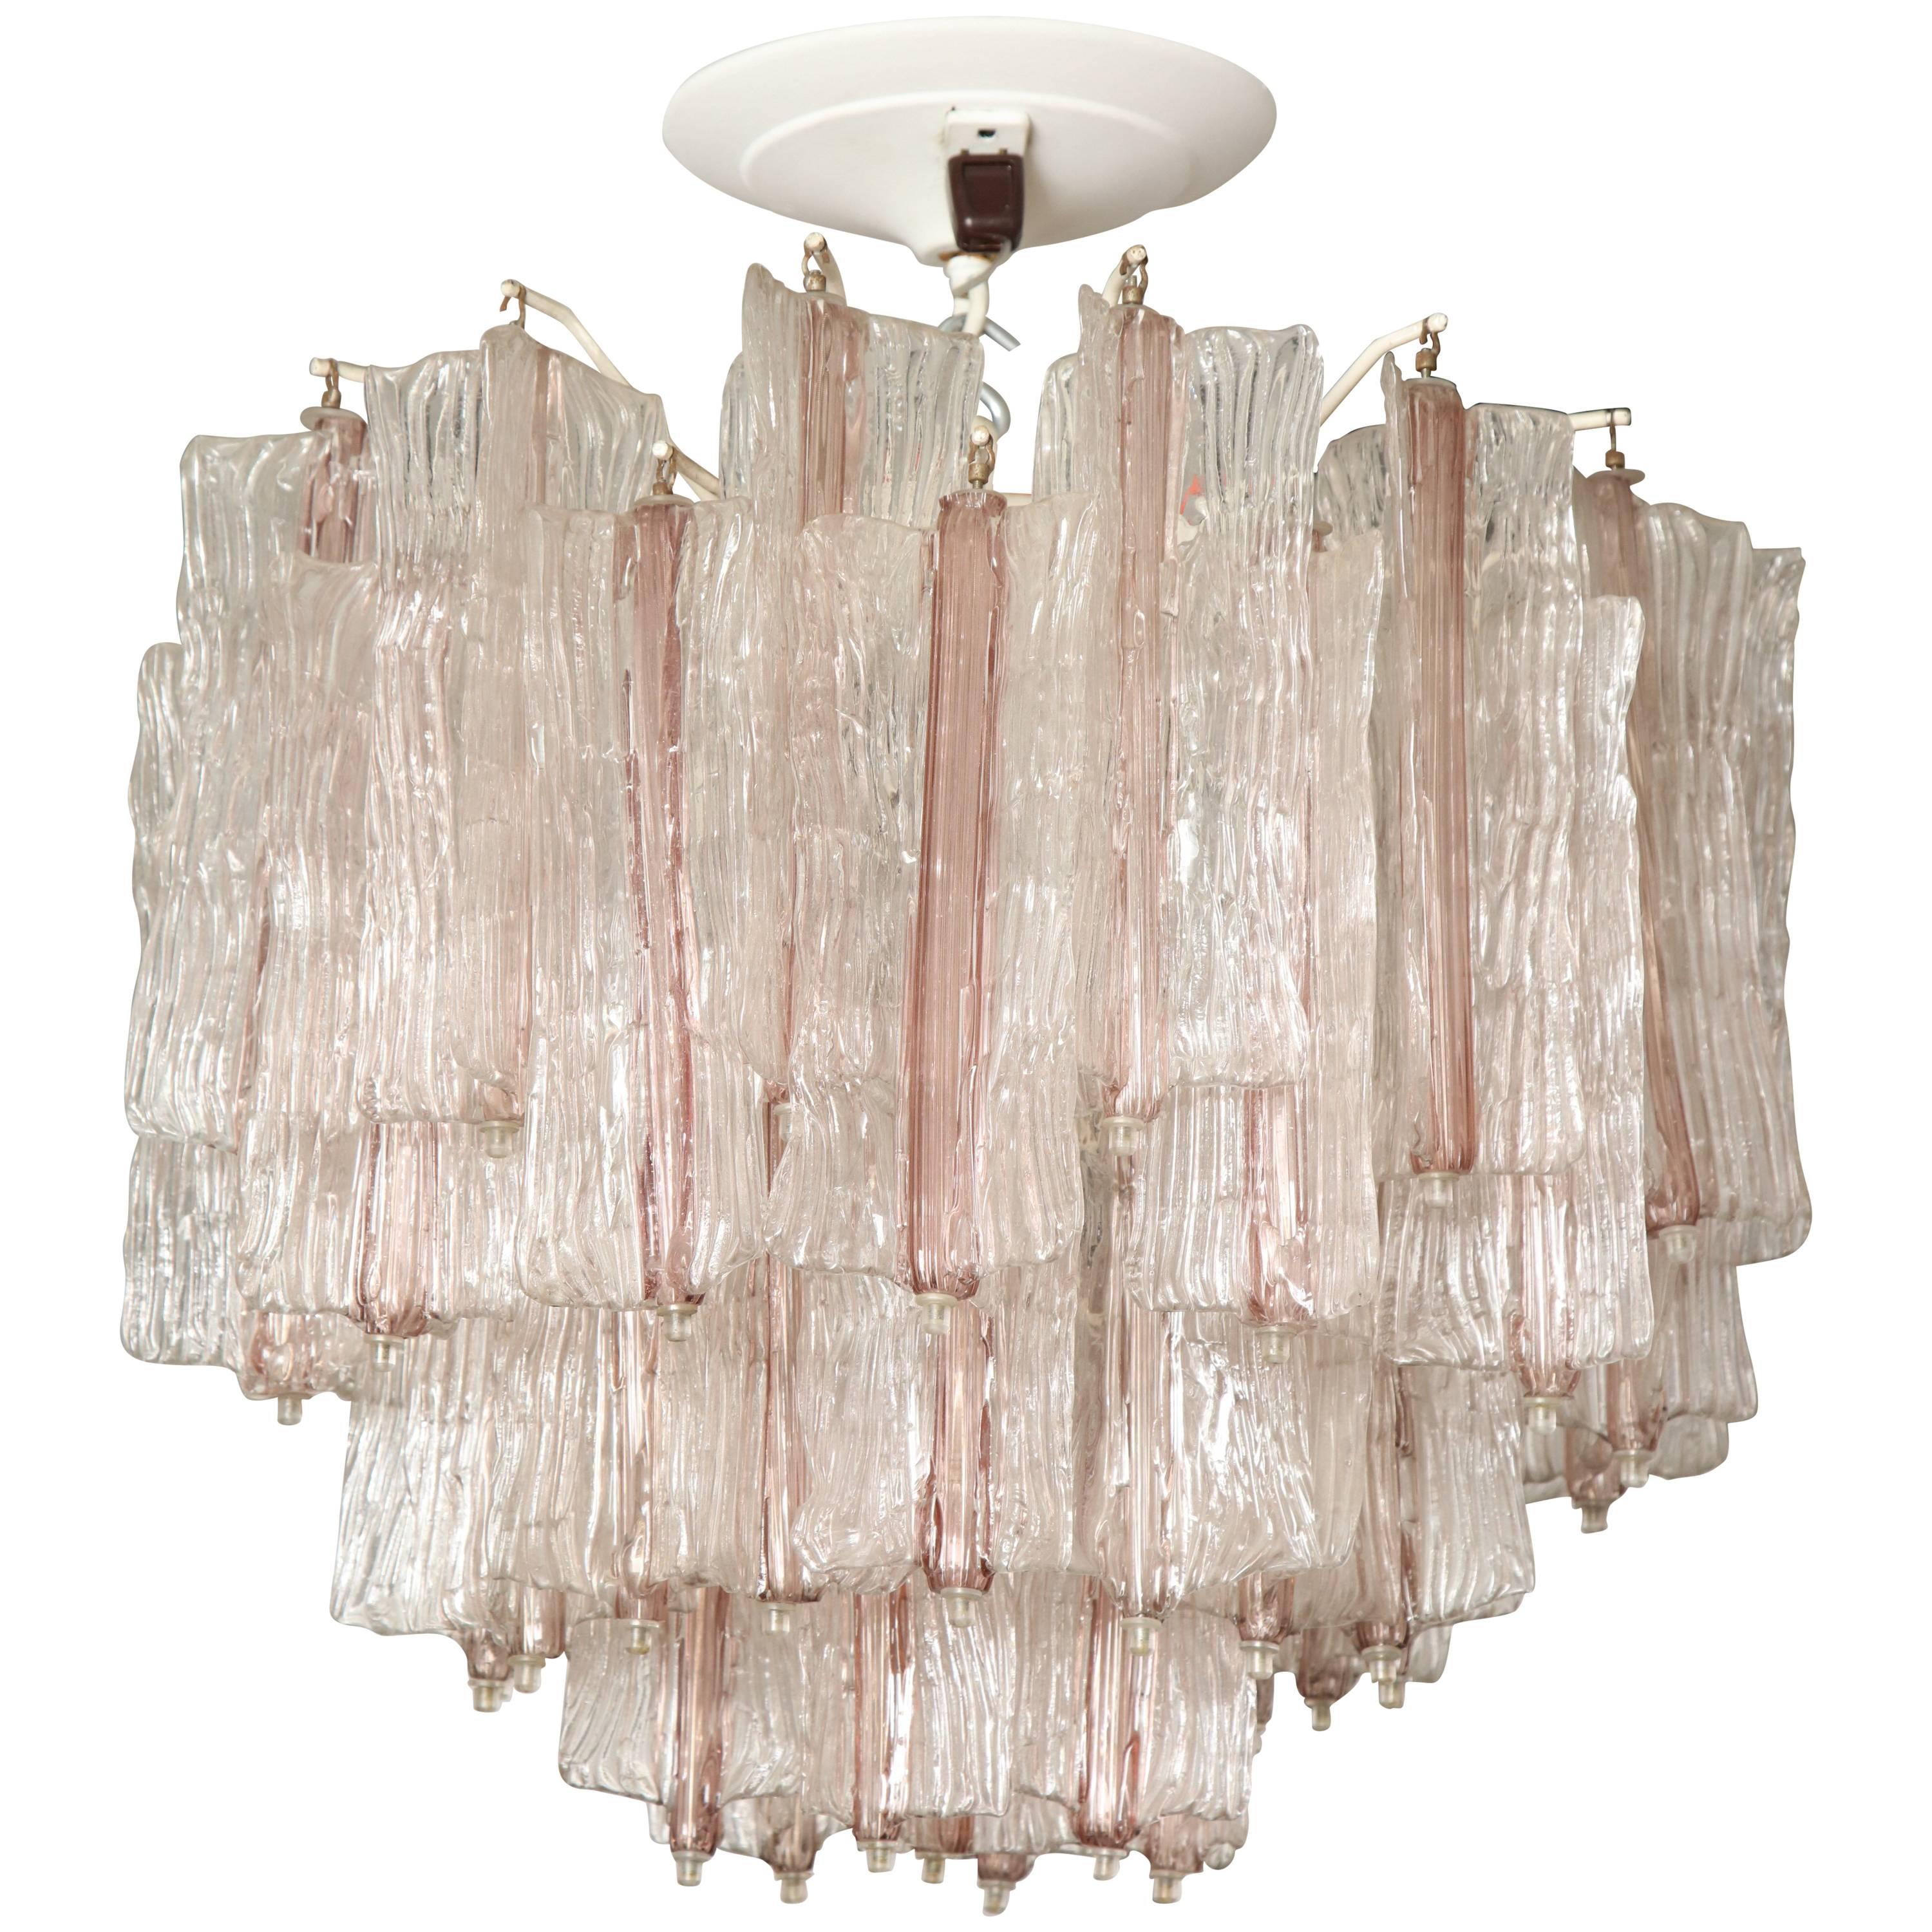 Vintage Amethyst and Clear Murano Glass Chandelier by Toni Zuccheri for Venini